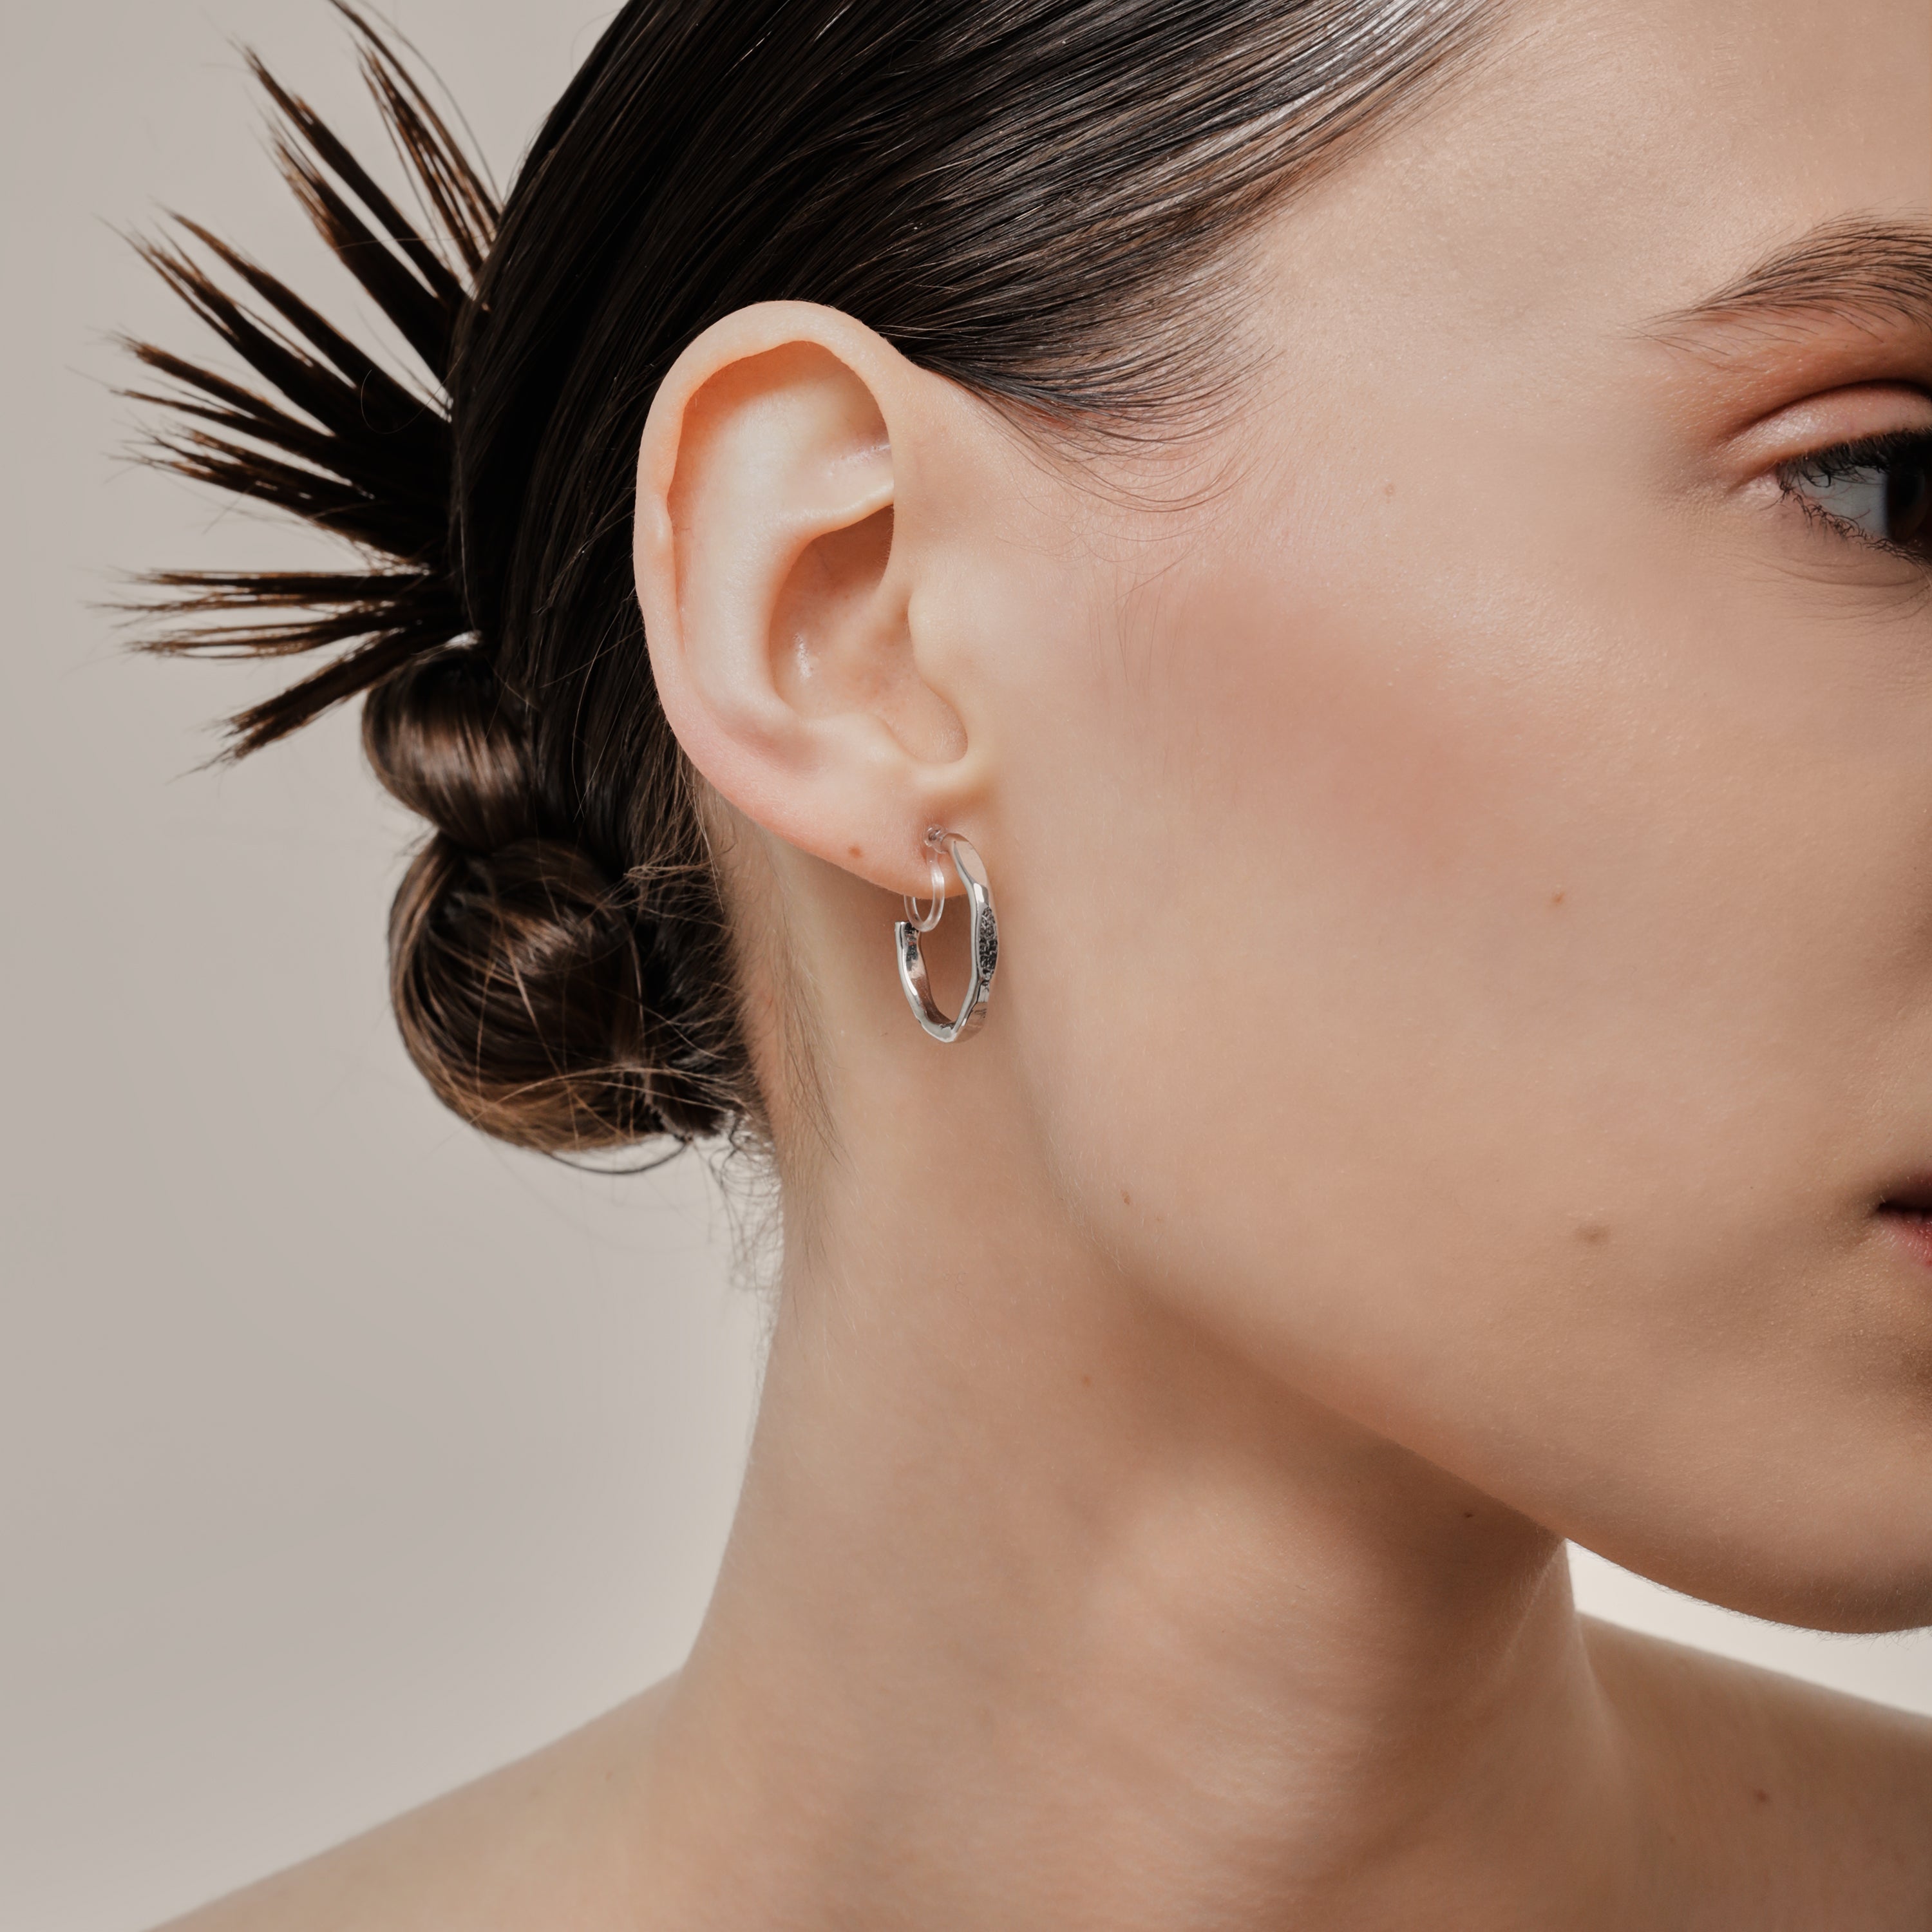 A model wearing the Smith Hoop Clip On Earrings in Silver, perfect for all ear sizes. With a resin clip-on closure and medium secure hold, these earrings provide comfort for 8-12 hours. Whether you have thick, large, or sensitive ears, these earrings are a must-have! Note: No adjustments possible and one pair only.